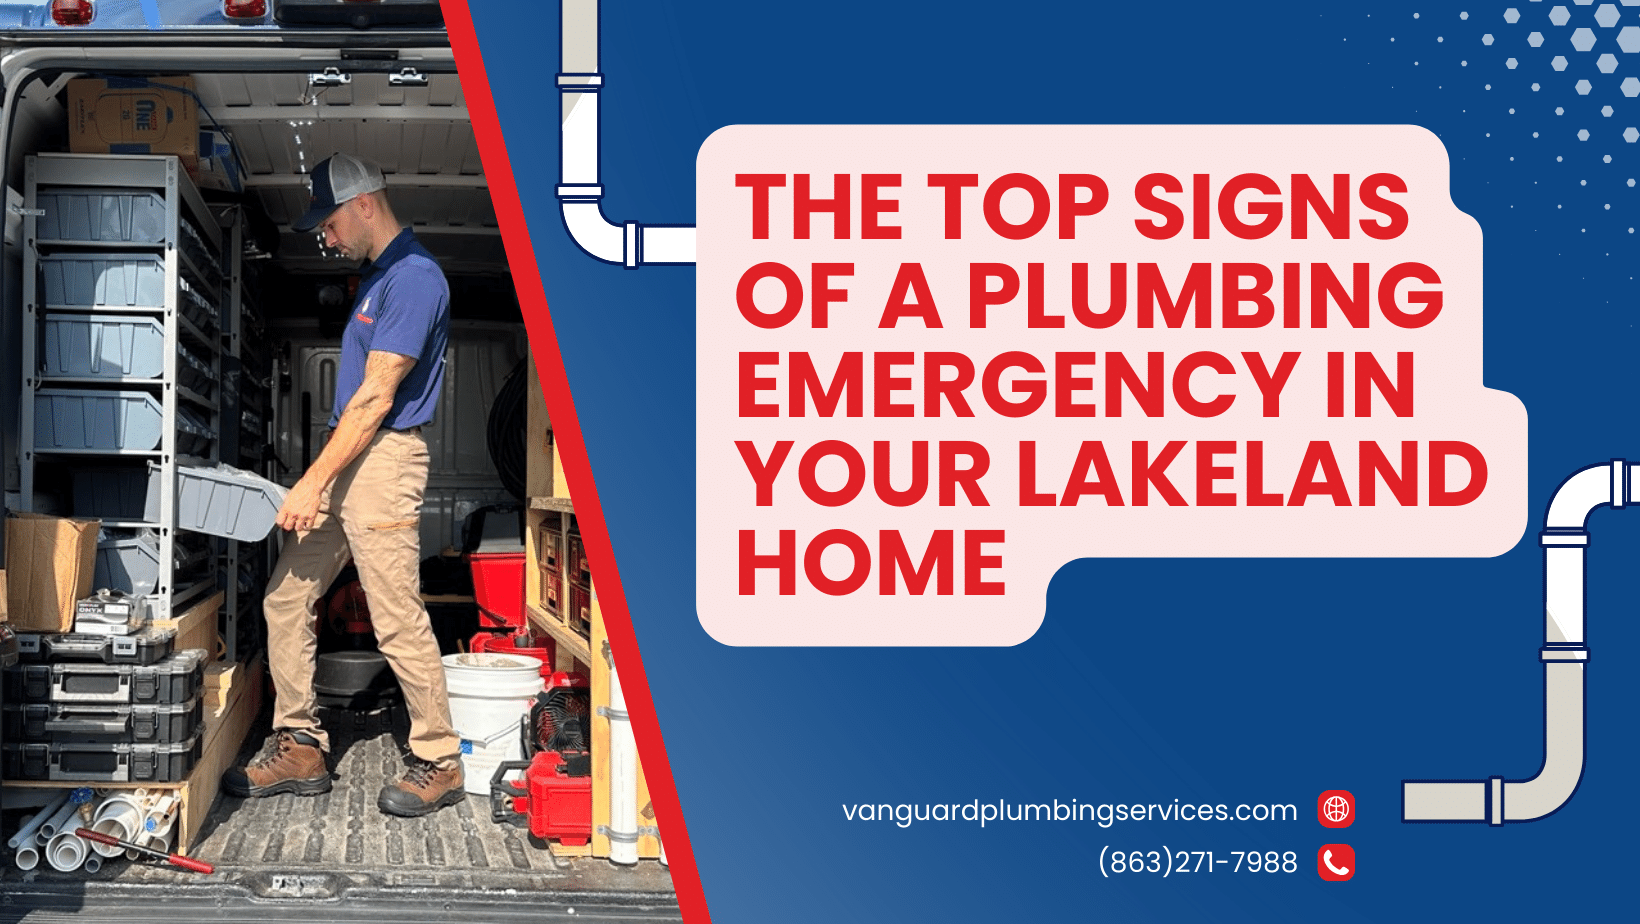 The Top Signs of a Plumbing Emergency in Your Lakeland Home